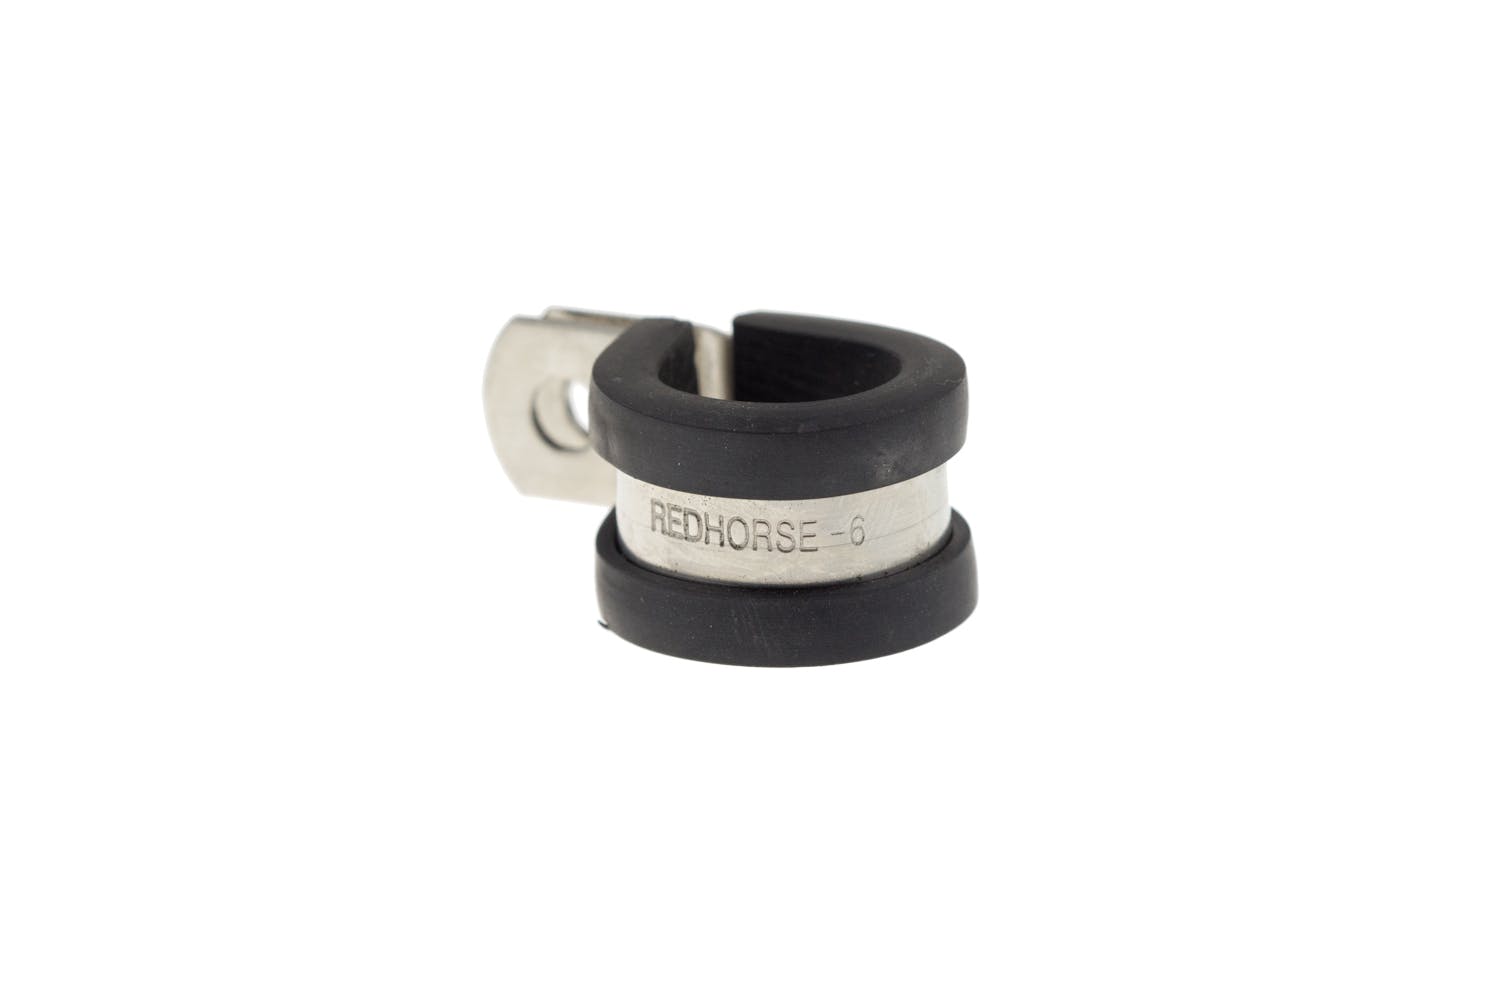 Redhorse Performance 220-06-2 -06 Cushioned Hose Clamp 10pcs/Package.